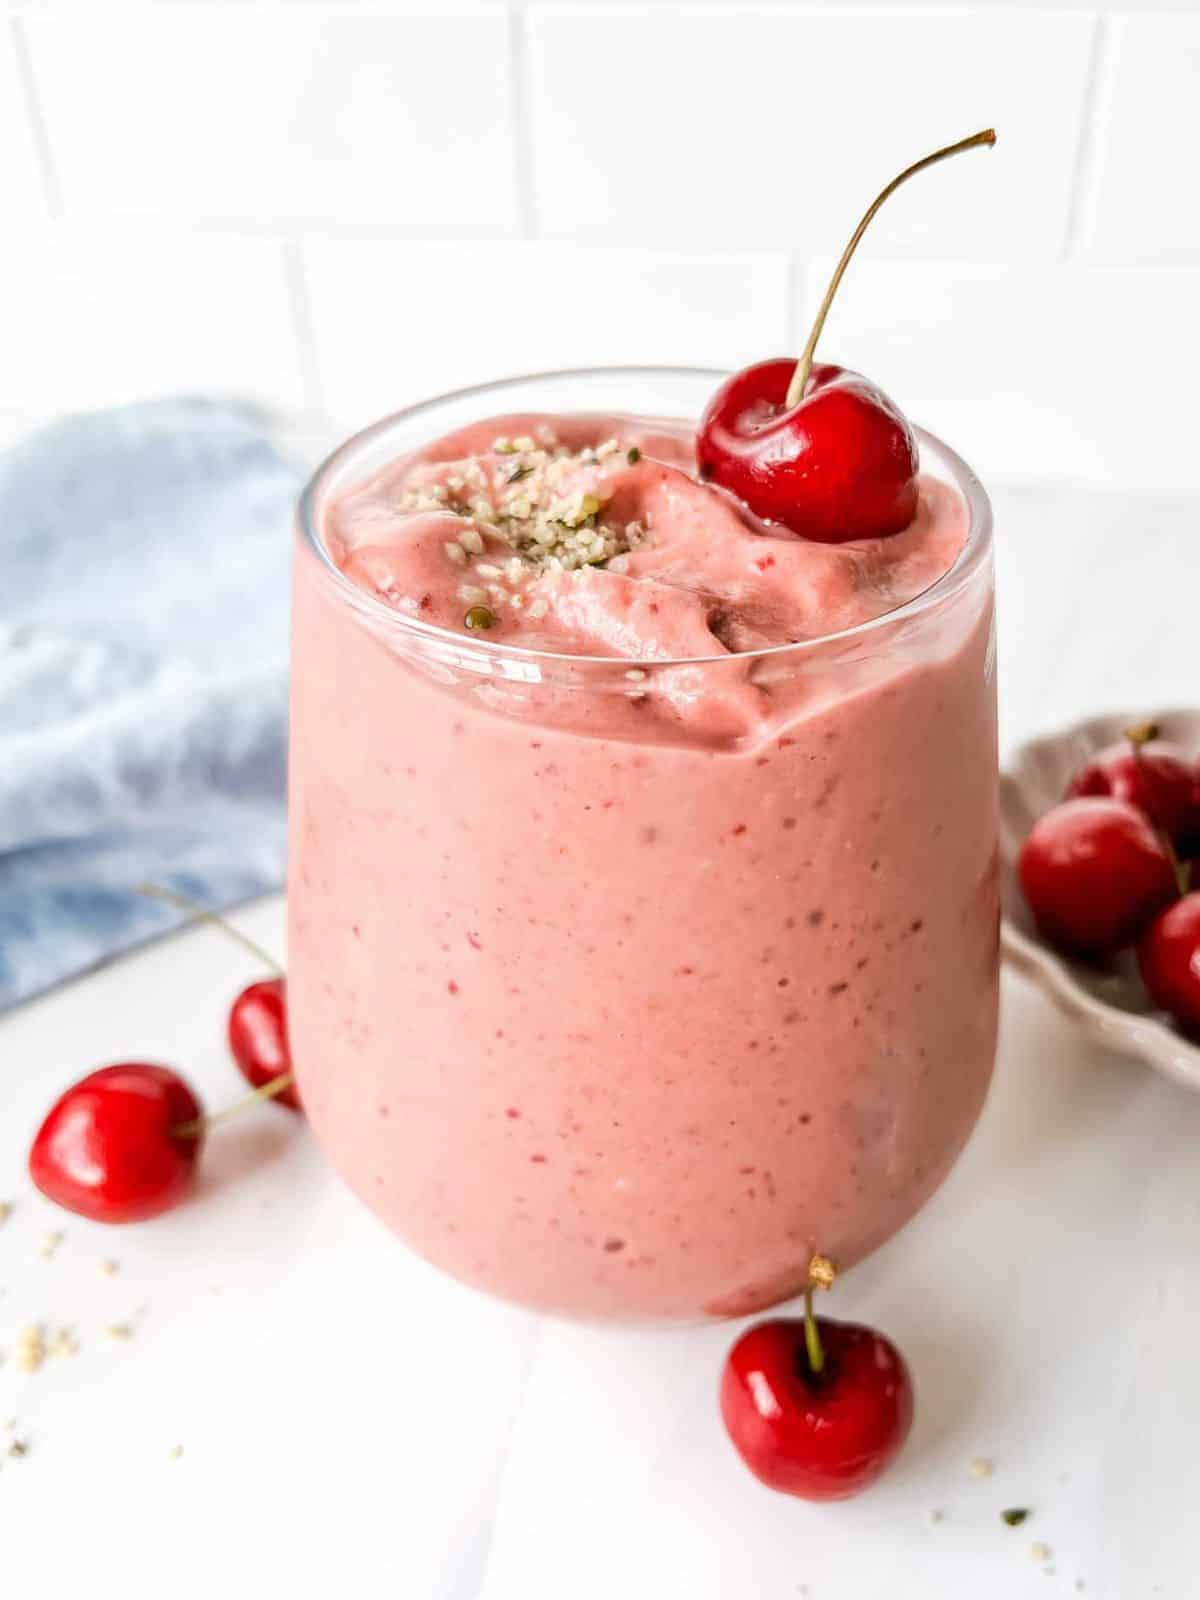 Pink smoothie in glass cup with cherries on top.